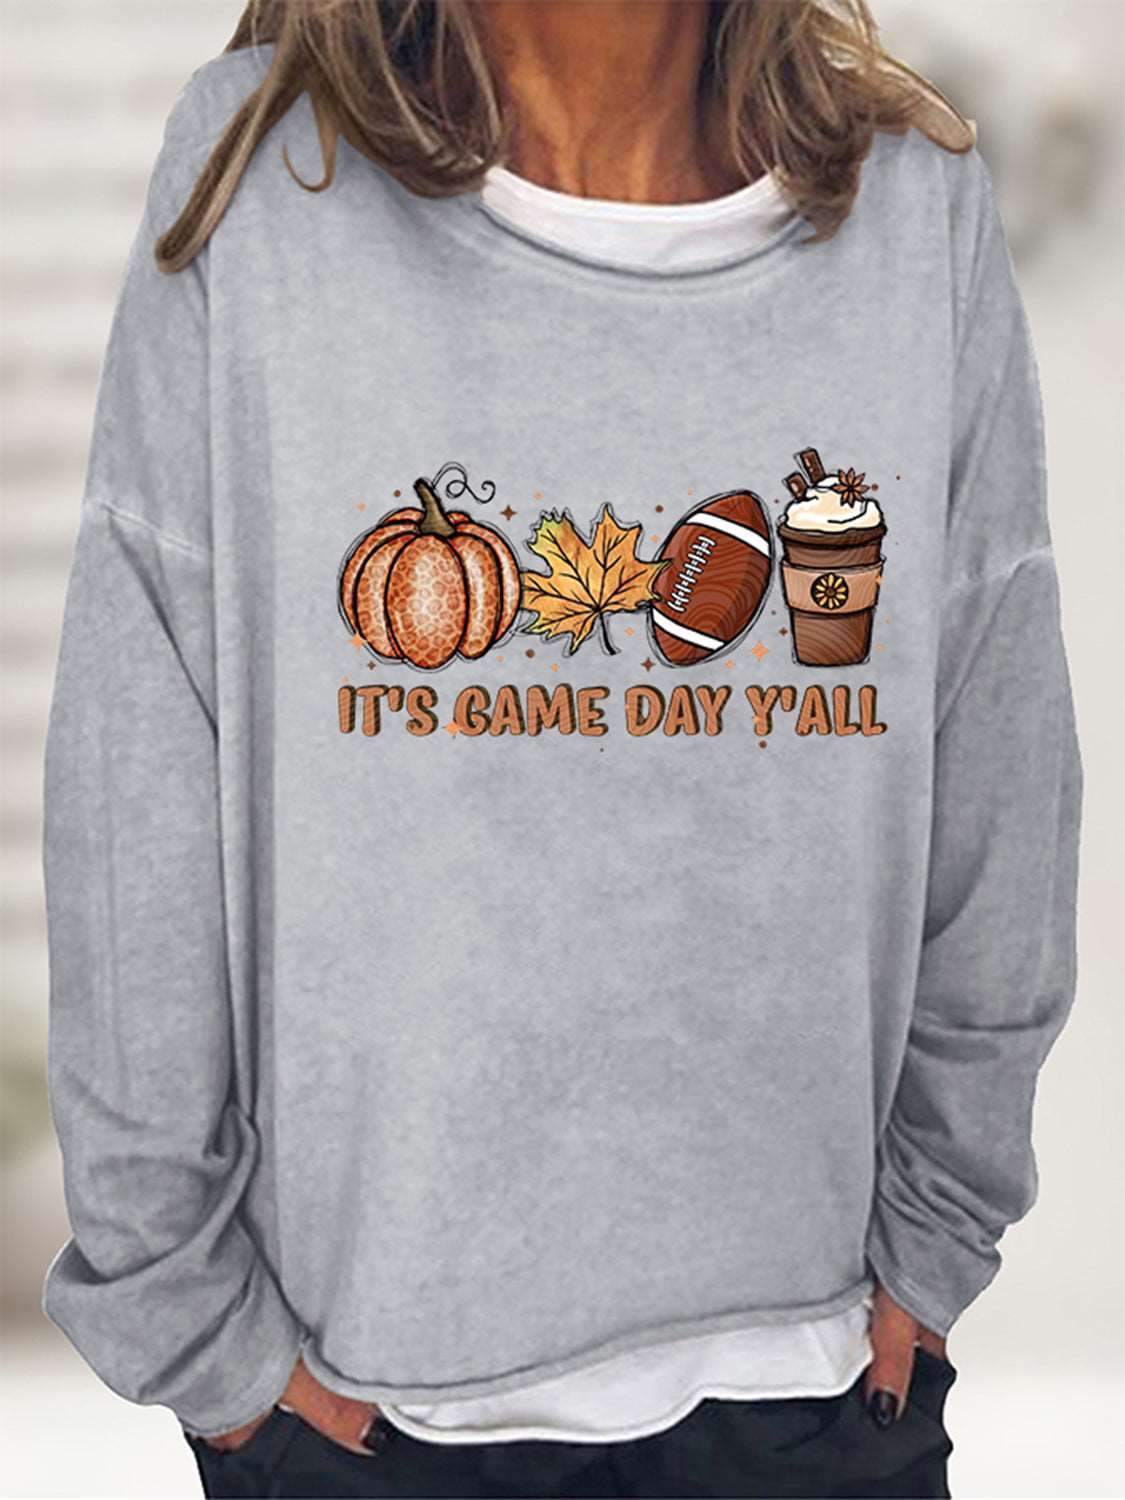 Full Size IT'S GAME DAY Y'ALL Graphic Sweatshirt (5 Colors)  Krazy Heart Designs Boutique Heather Gray S 